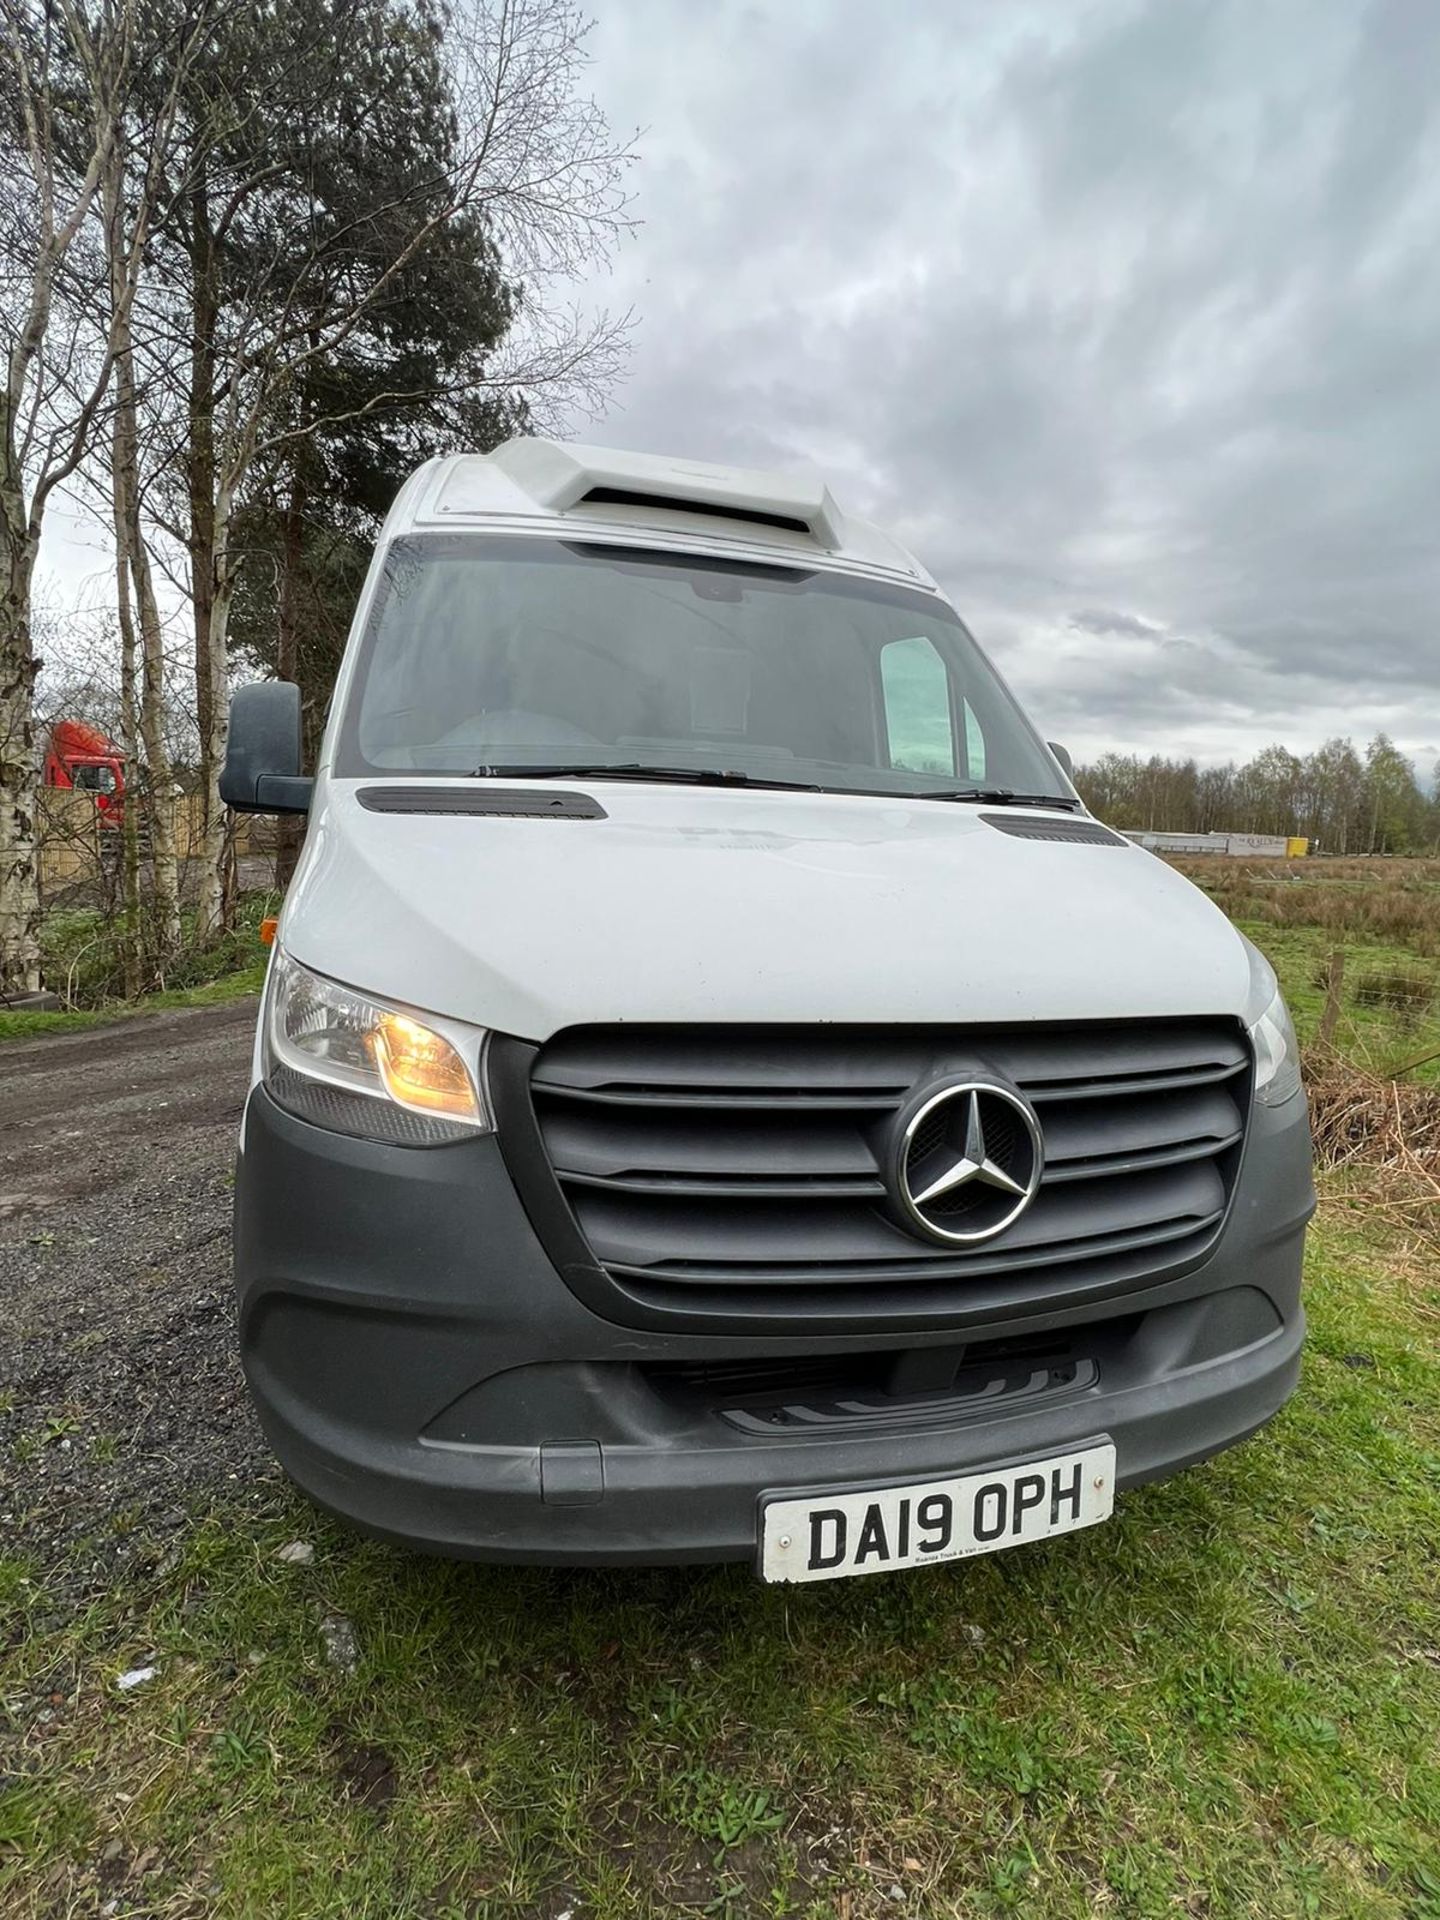 MERCEDES SPRINTER 314CDI AIR CONDITIONING - Image 20 of 22